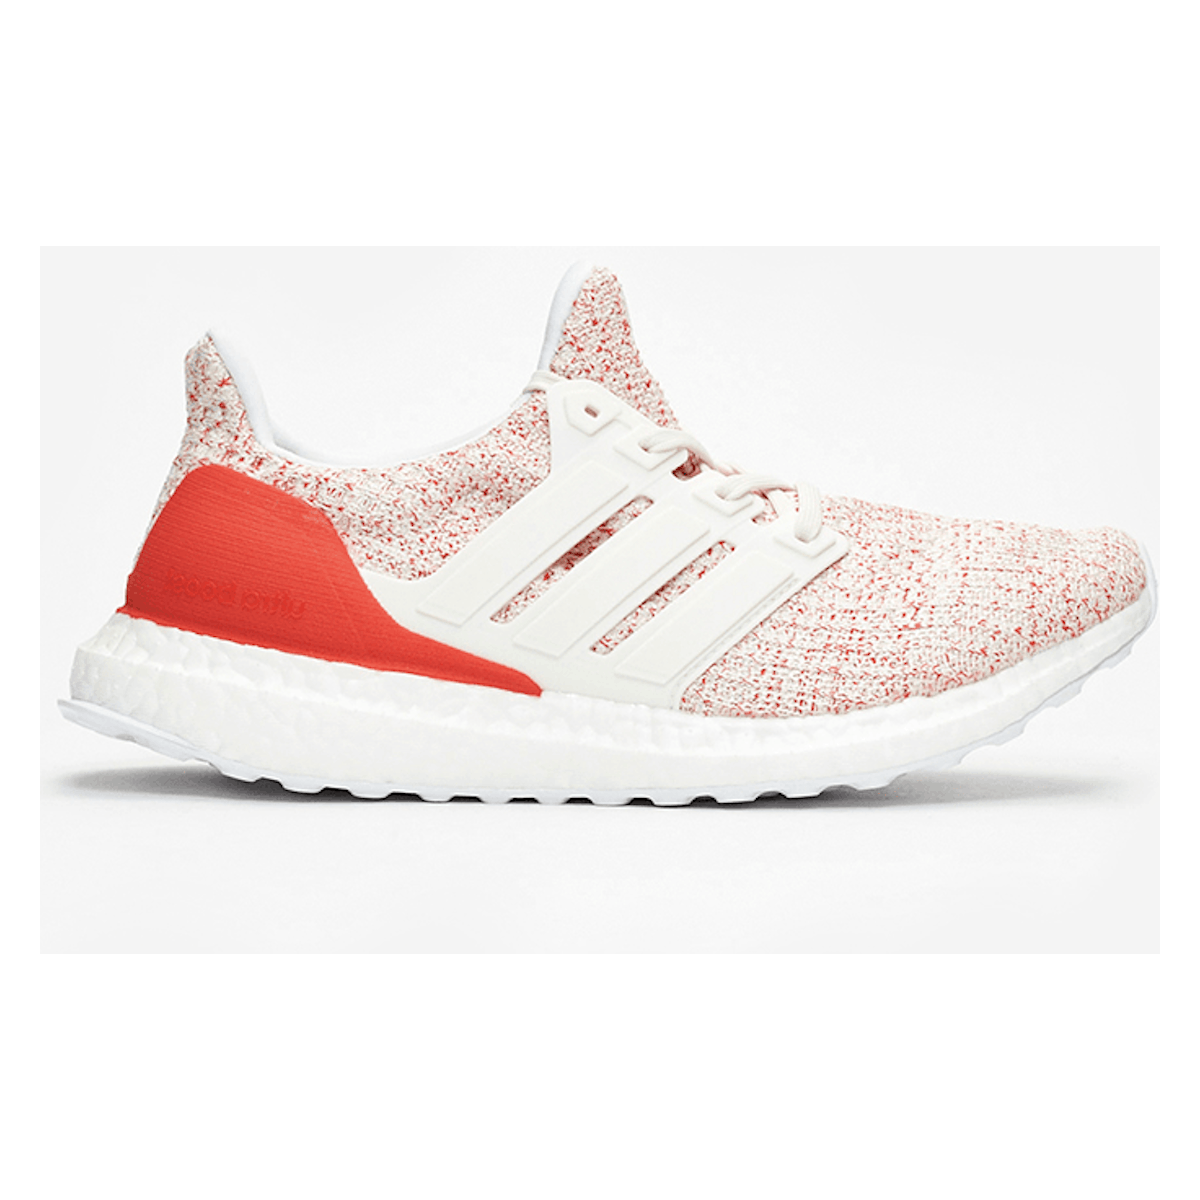 Adidas UltraBOOST WMNS "Chalk White / Active Red"